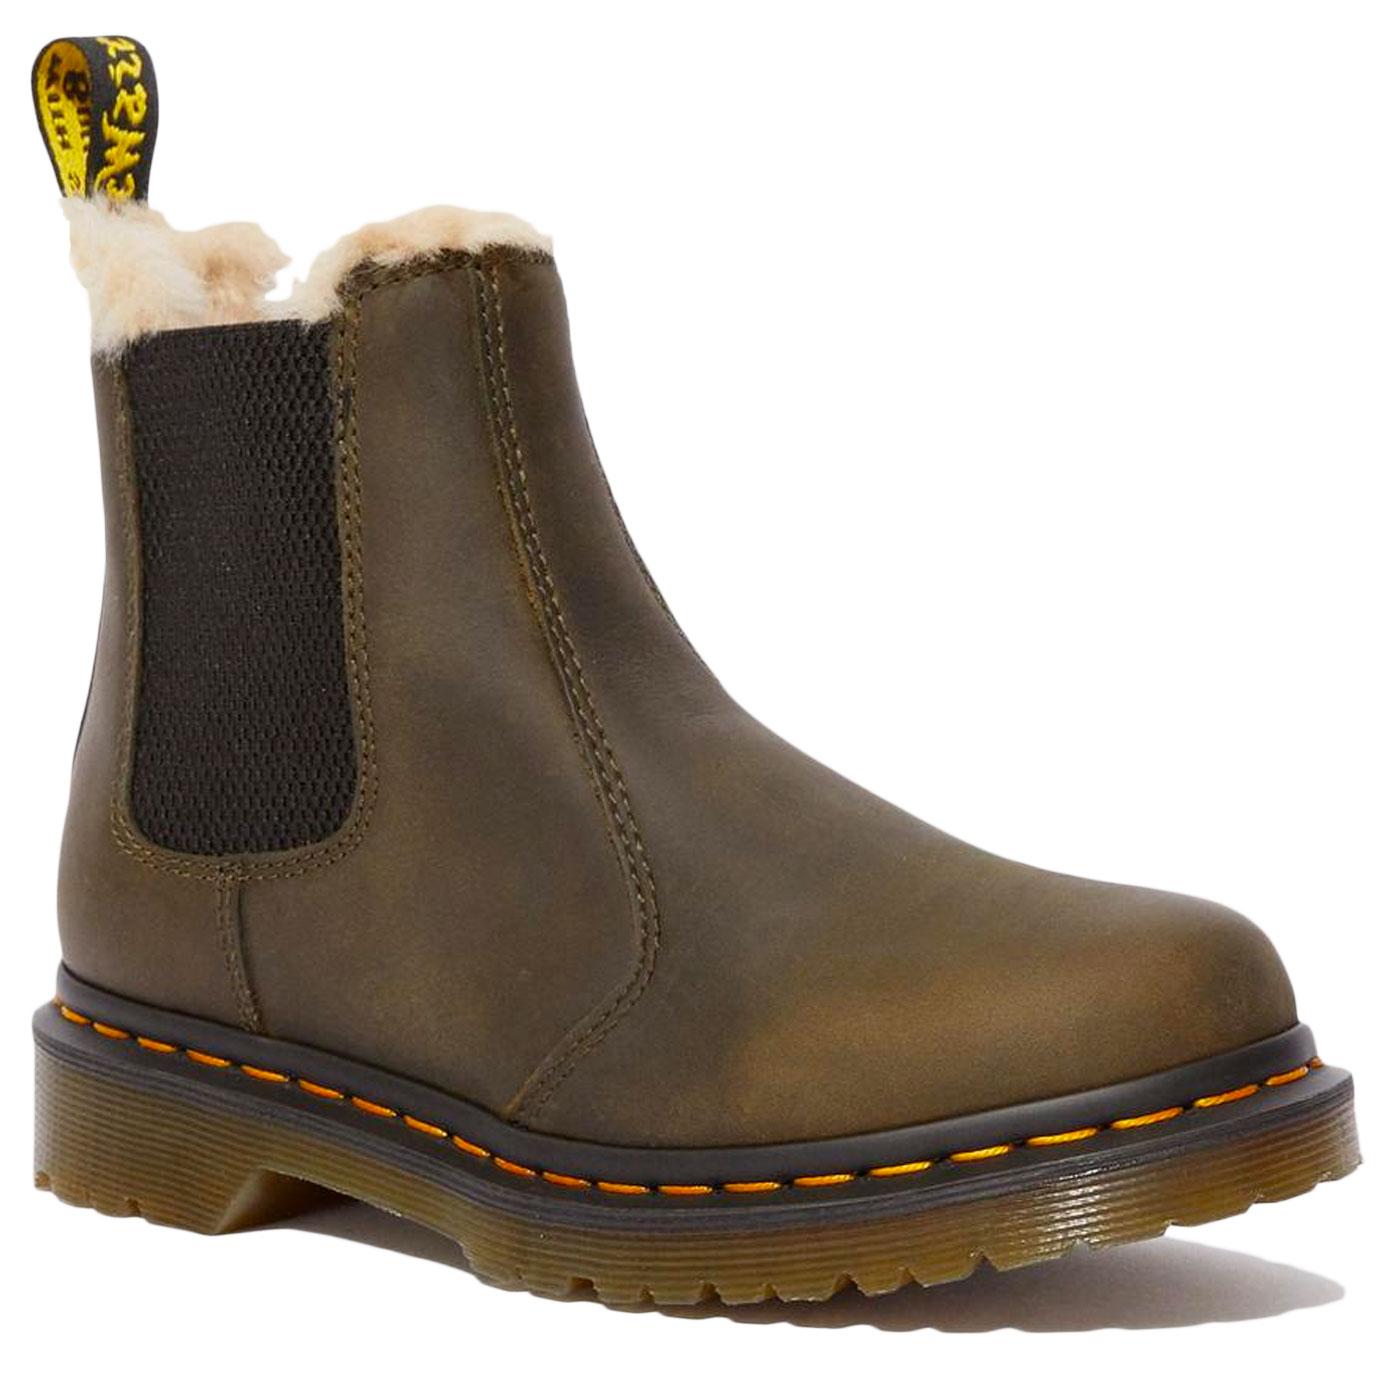 Affirm Council her DR MARTENS Leonore Olive Fur Lined Winter Ankle Boots